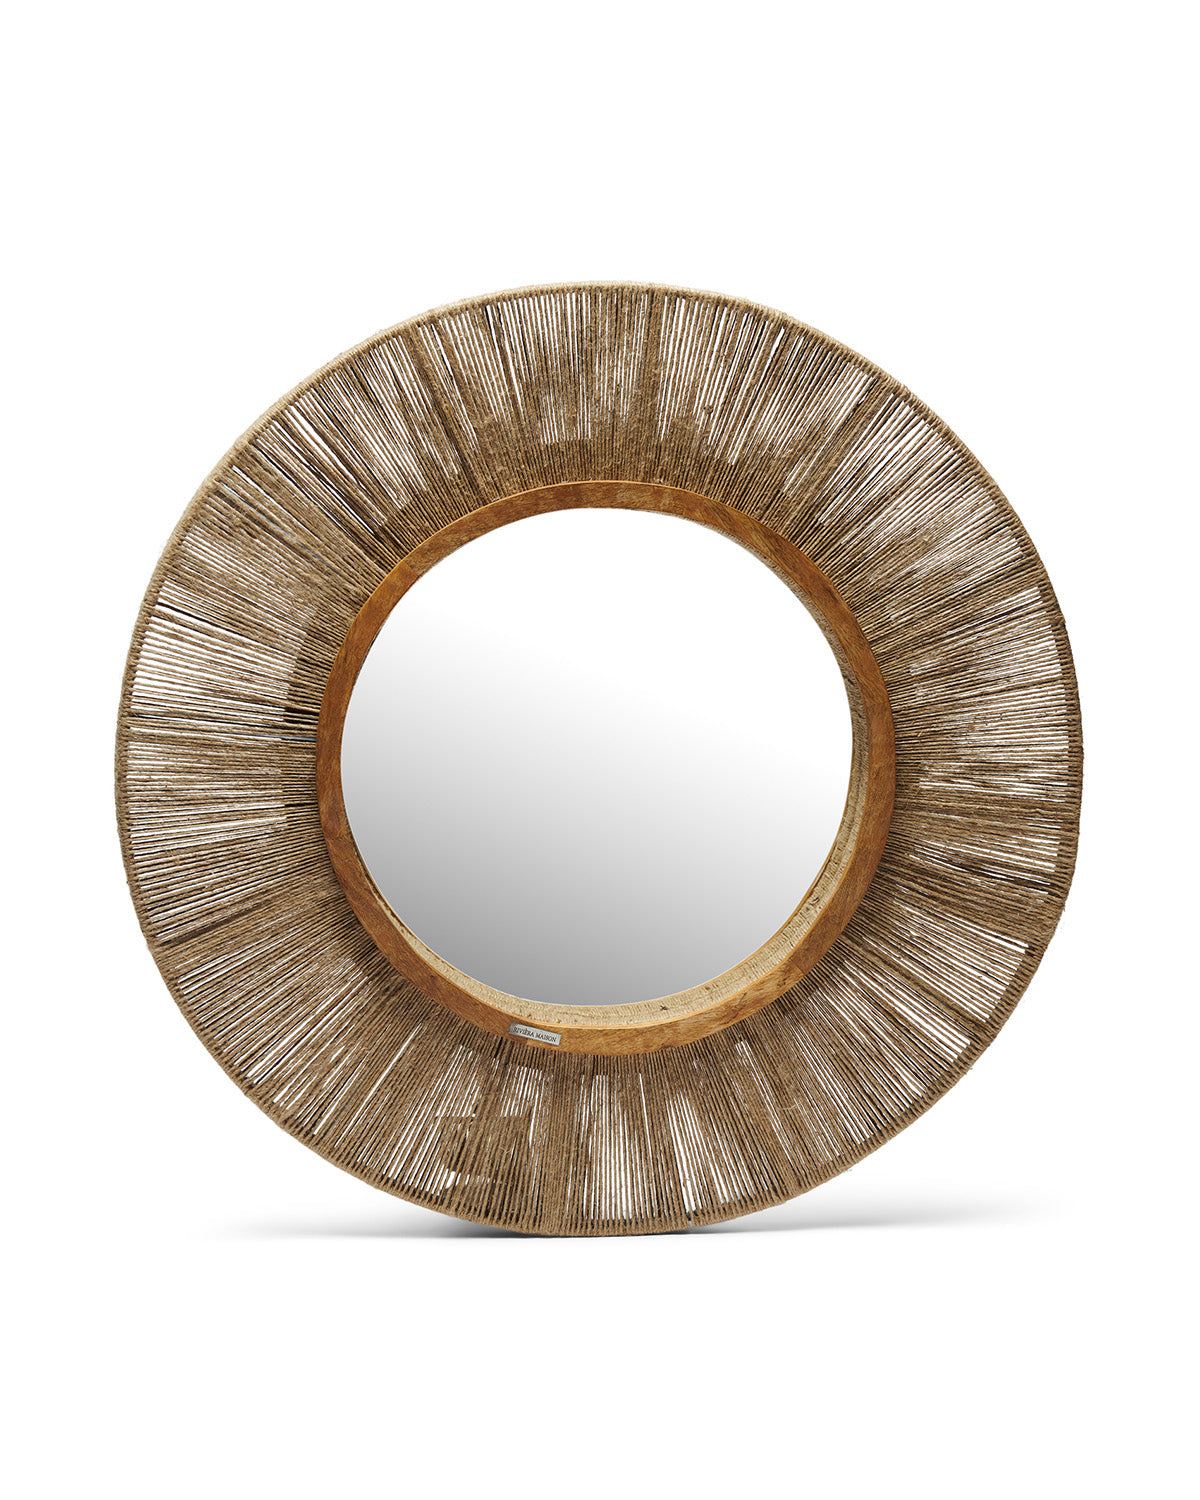 MIRROR round-framed mirror made from natural materials in neutral tones by Riviera Maison